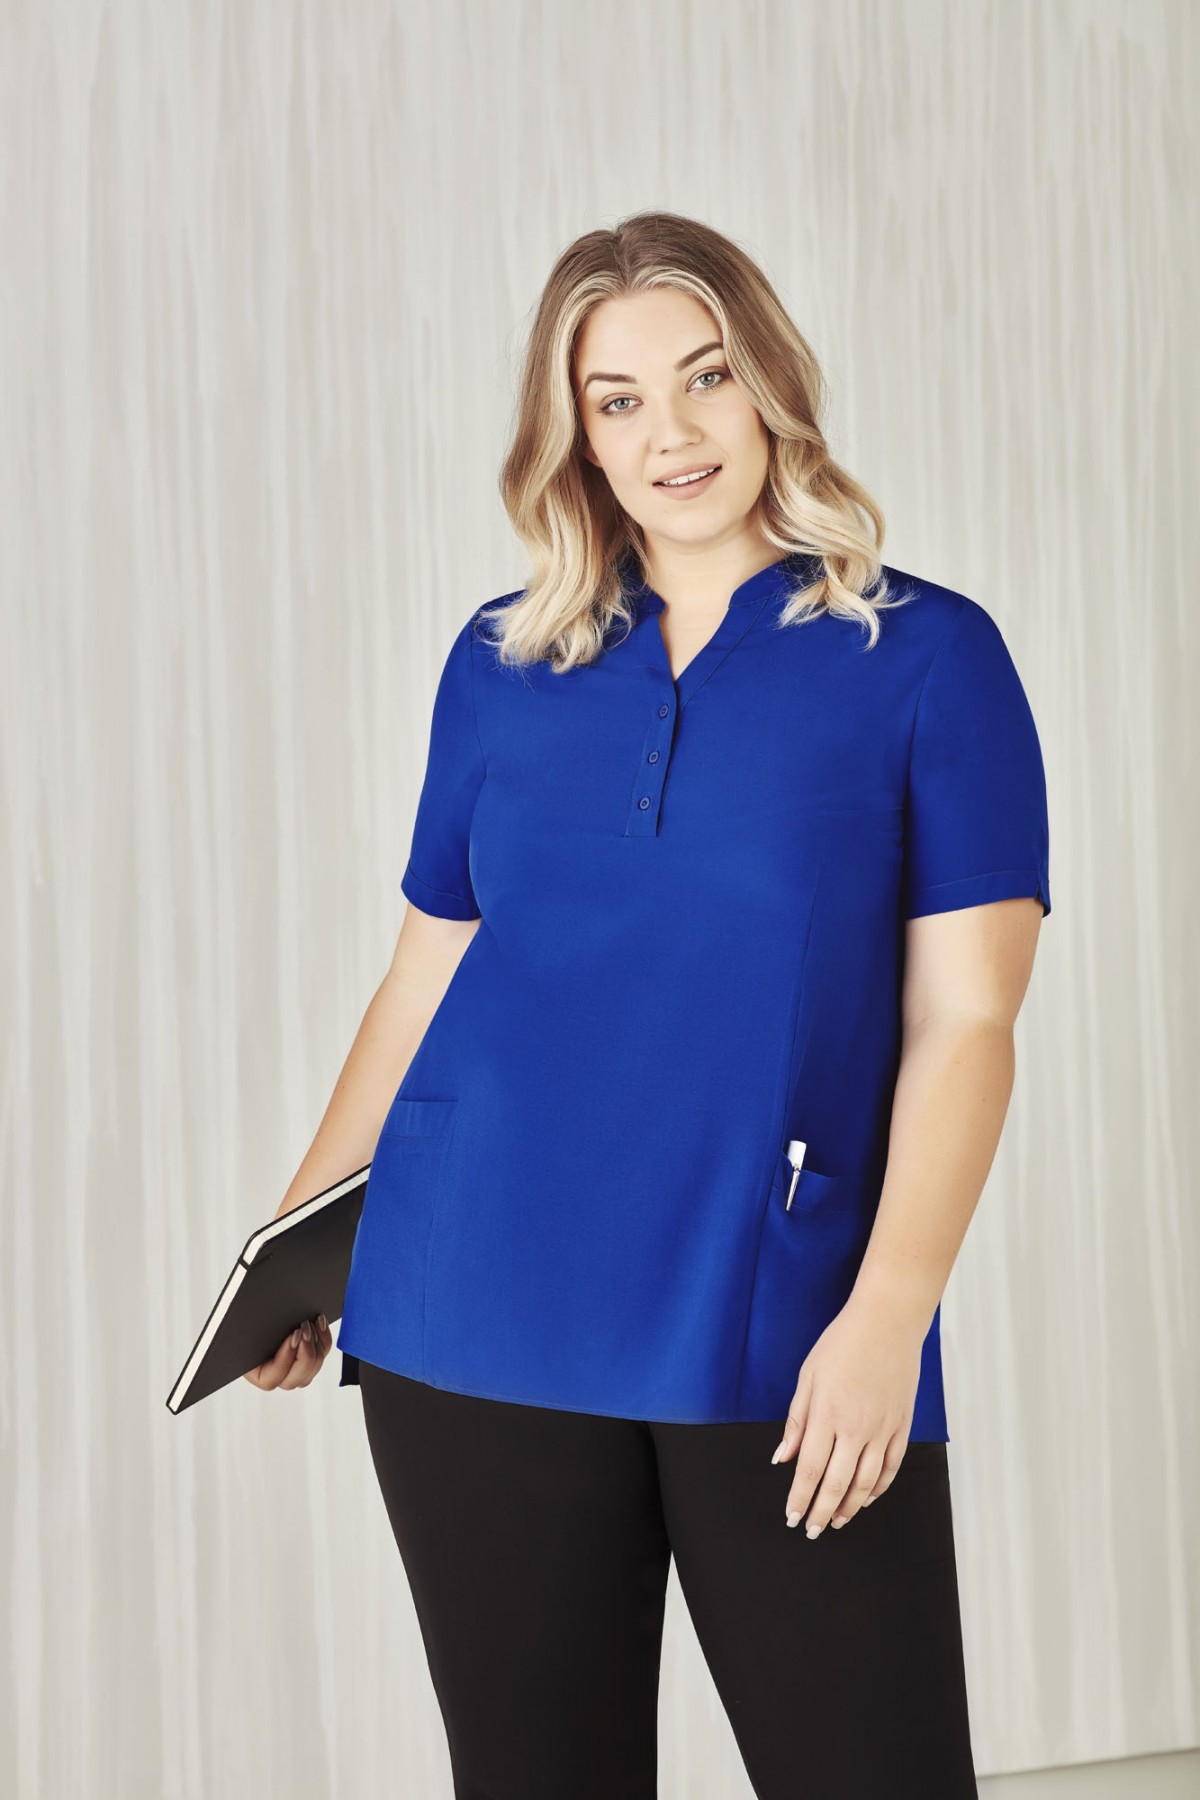 Buy BIZcare Women's Stretch Tunic Top with pockets in NZ | The Uniform ...